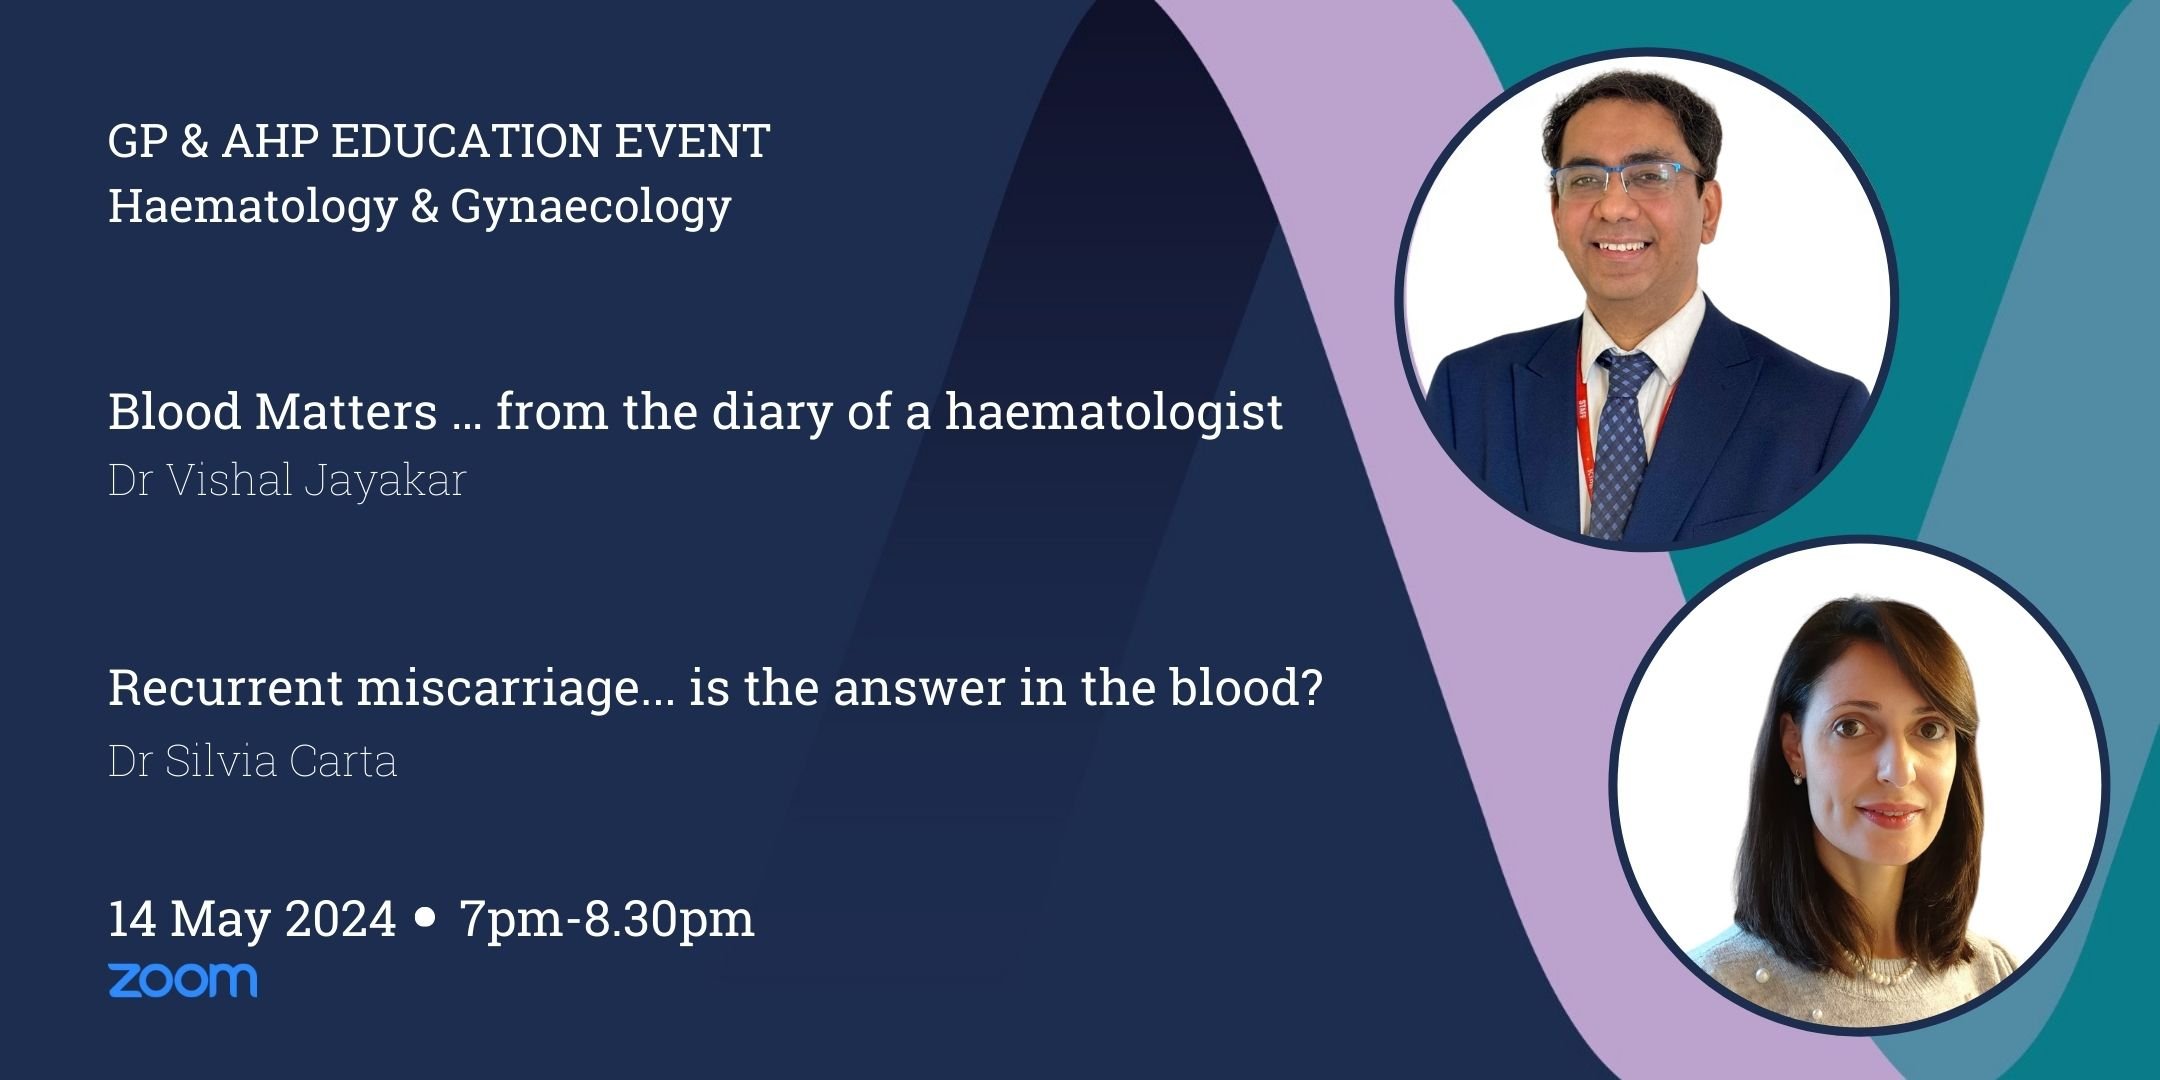 https://www.eventbrite.co.uk/e/gp-ahp-educational-lecture-via-zoom-haematology-gynaecology-tickets-872664211147?aff=B2BHaematology24Website